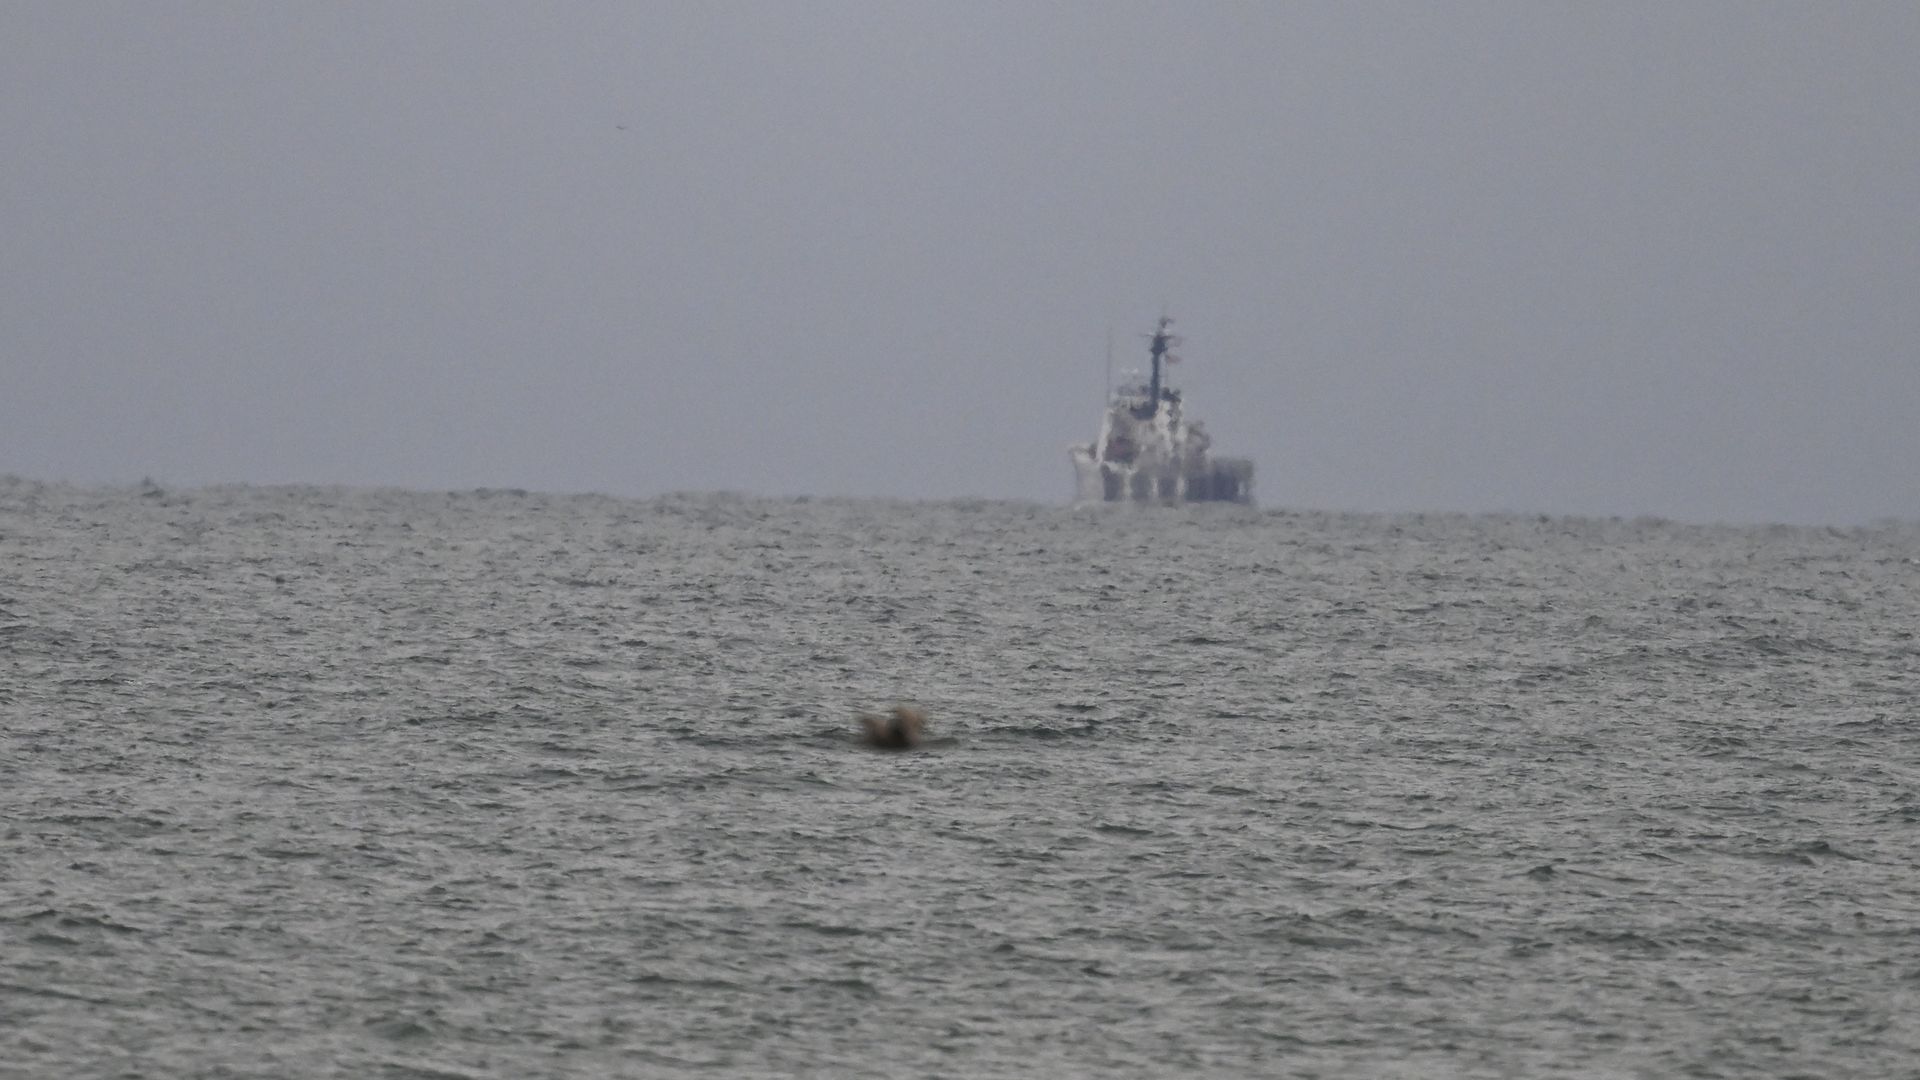  A ship scans the sea during efforts to retrieve and recover the Chinese spy balloon on Sunday.